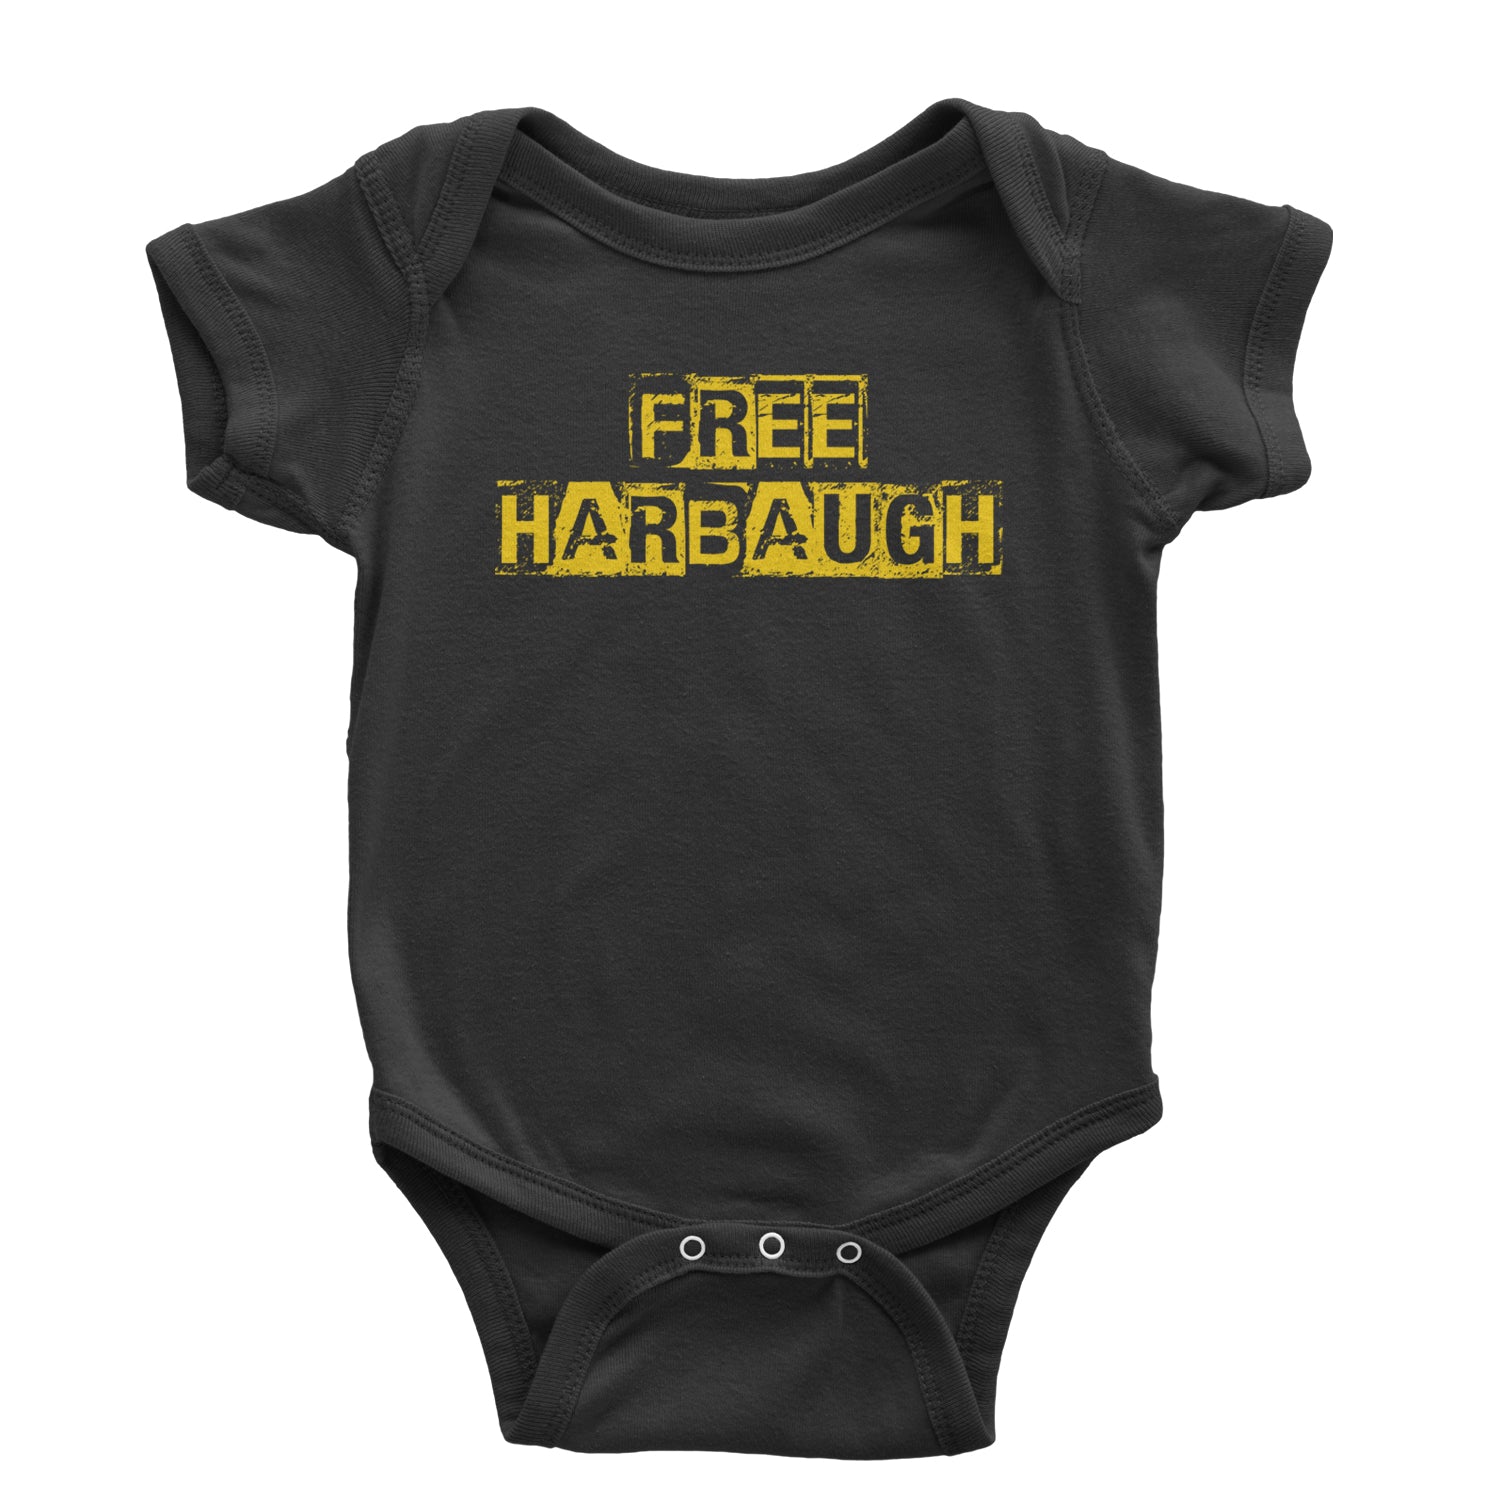 Free Harbaugh Release Our Coach Infant One-Piece Romper Bodysuit and Toddler T-shirt